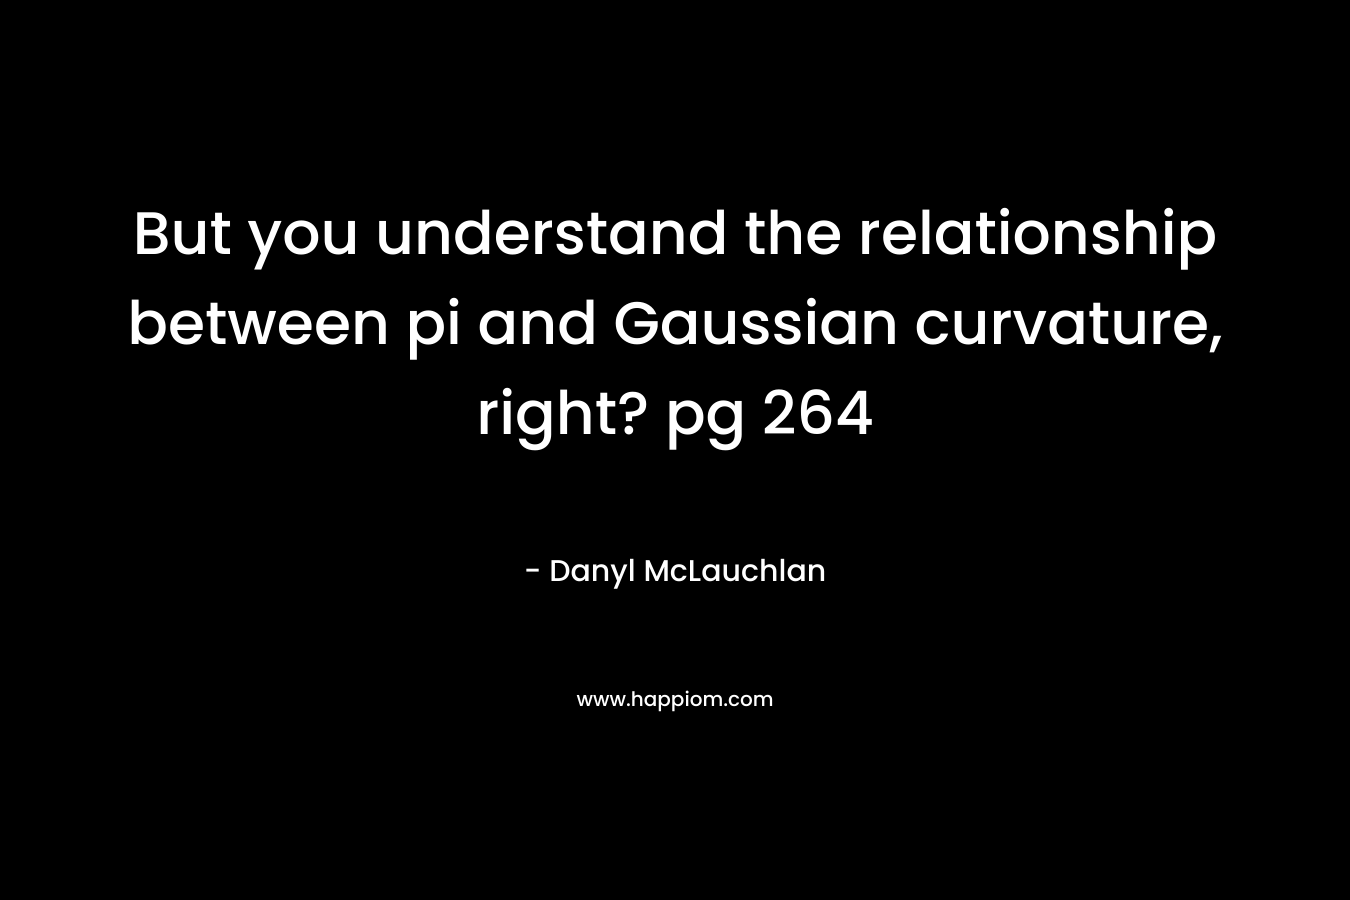 But you understand the relationship between pi and Gaussian curvature, right? pg 264 – Danyl McLauchlan